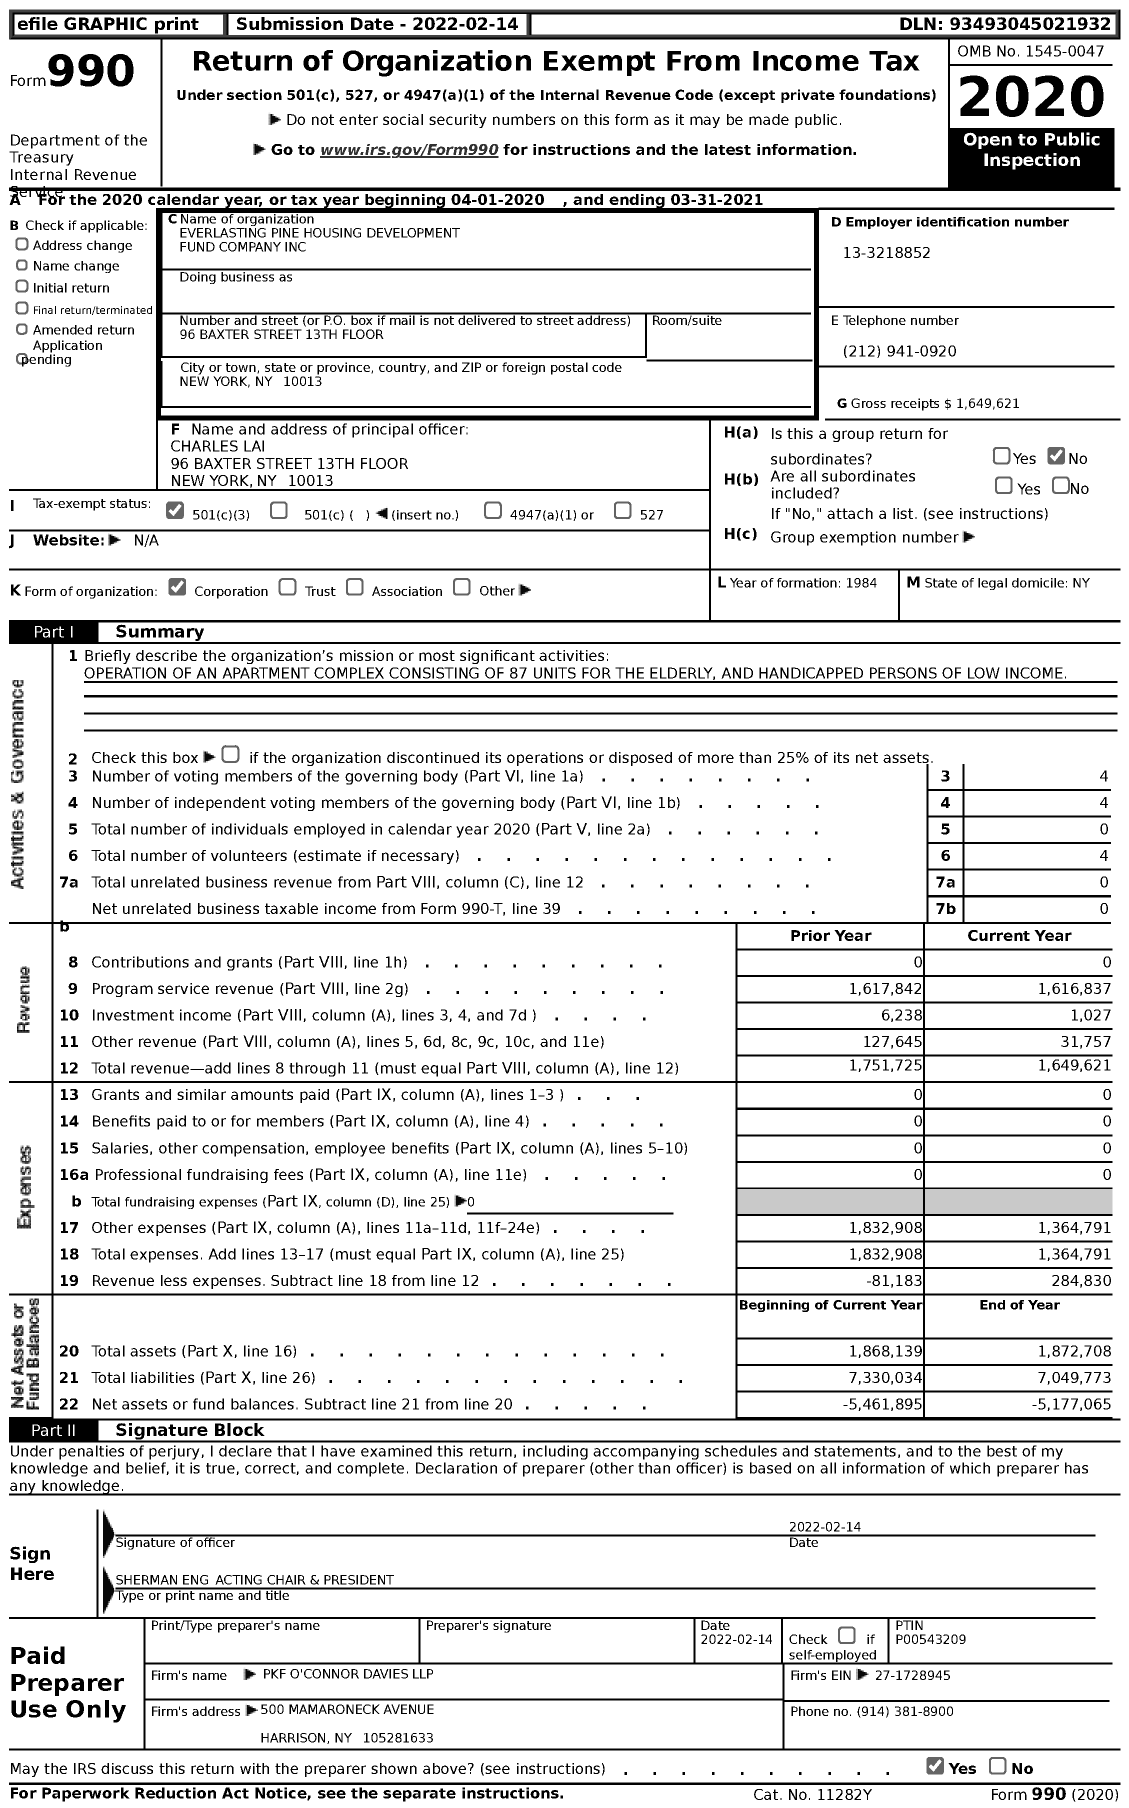 Image of first page of 2020 Form 990 for Everlasting Pine Housing Development Fund Company